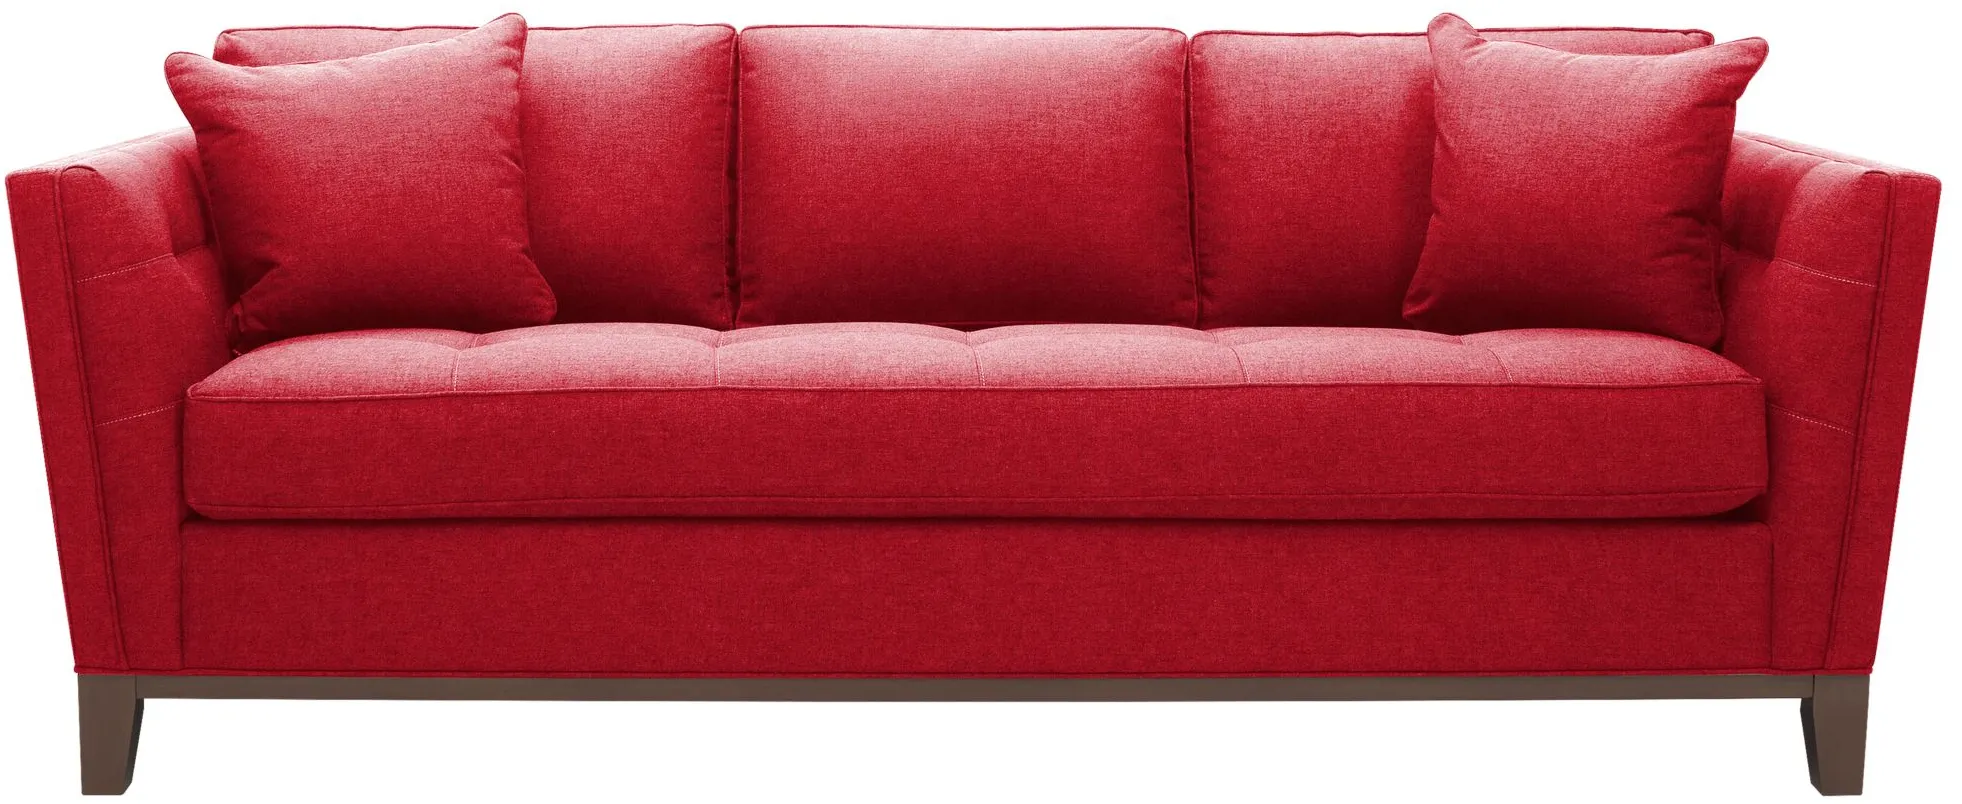 Macauley Queen Sleeper Sofa in Suede So Soft Cardinal by H.M. Richards